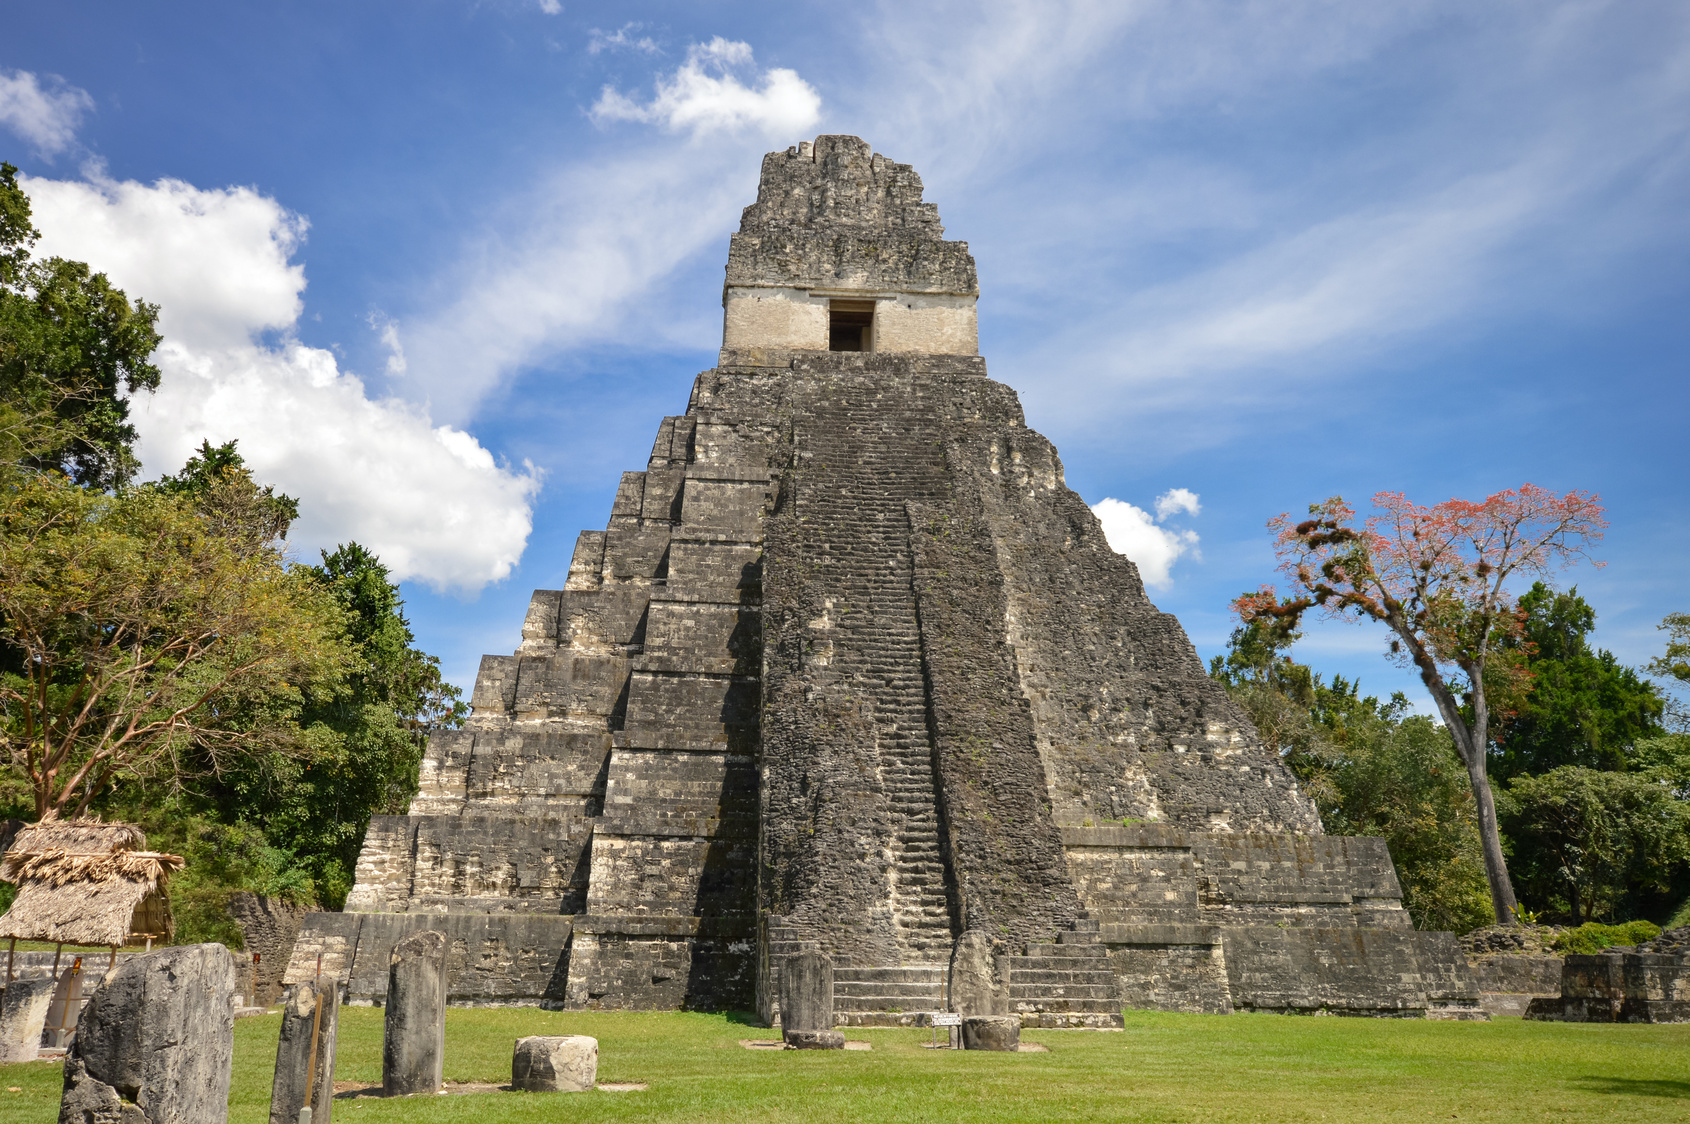 Temple I of the Maya archaeological site of Tikal in Guatemala